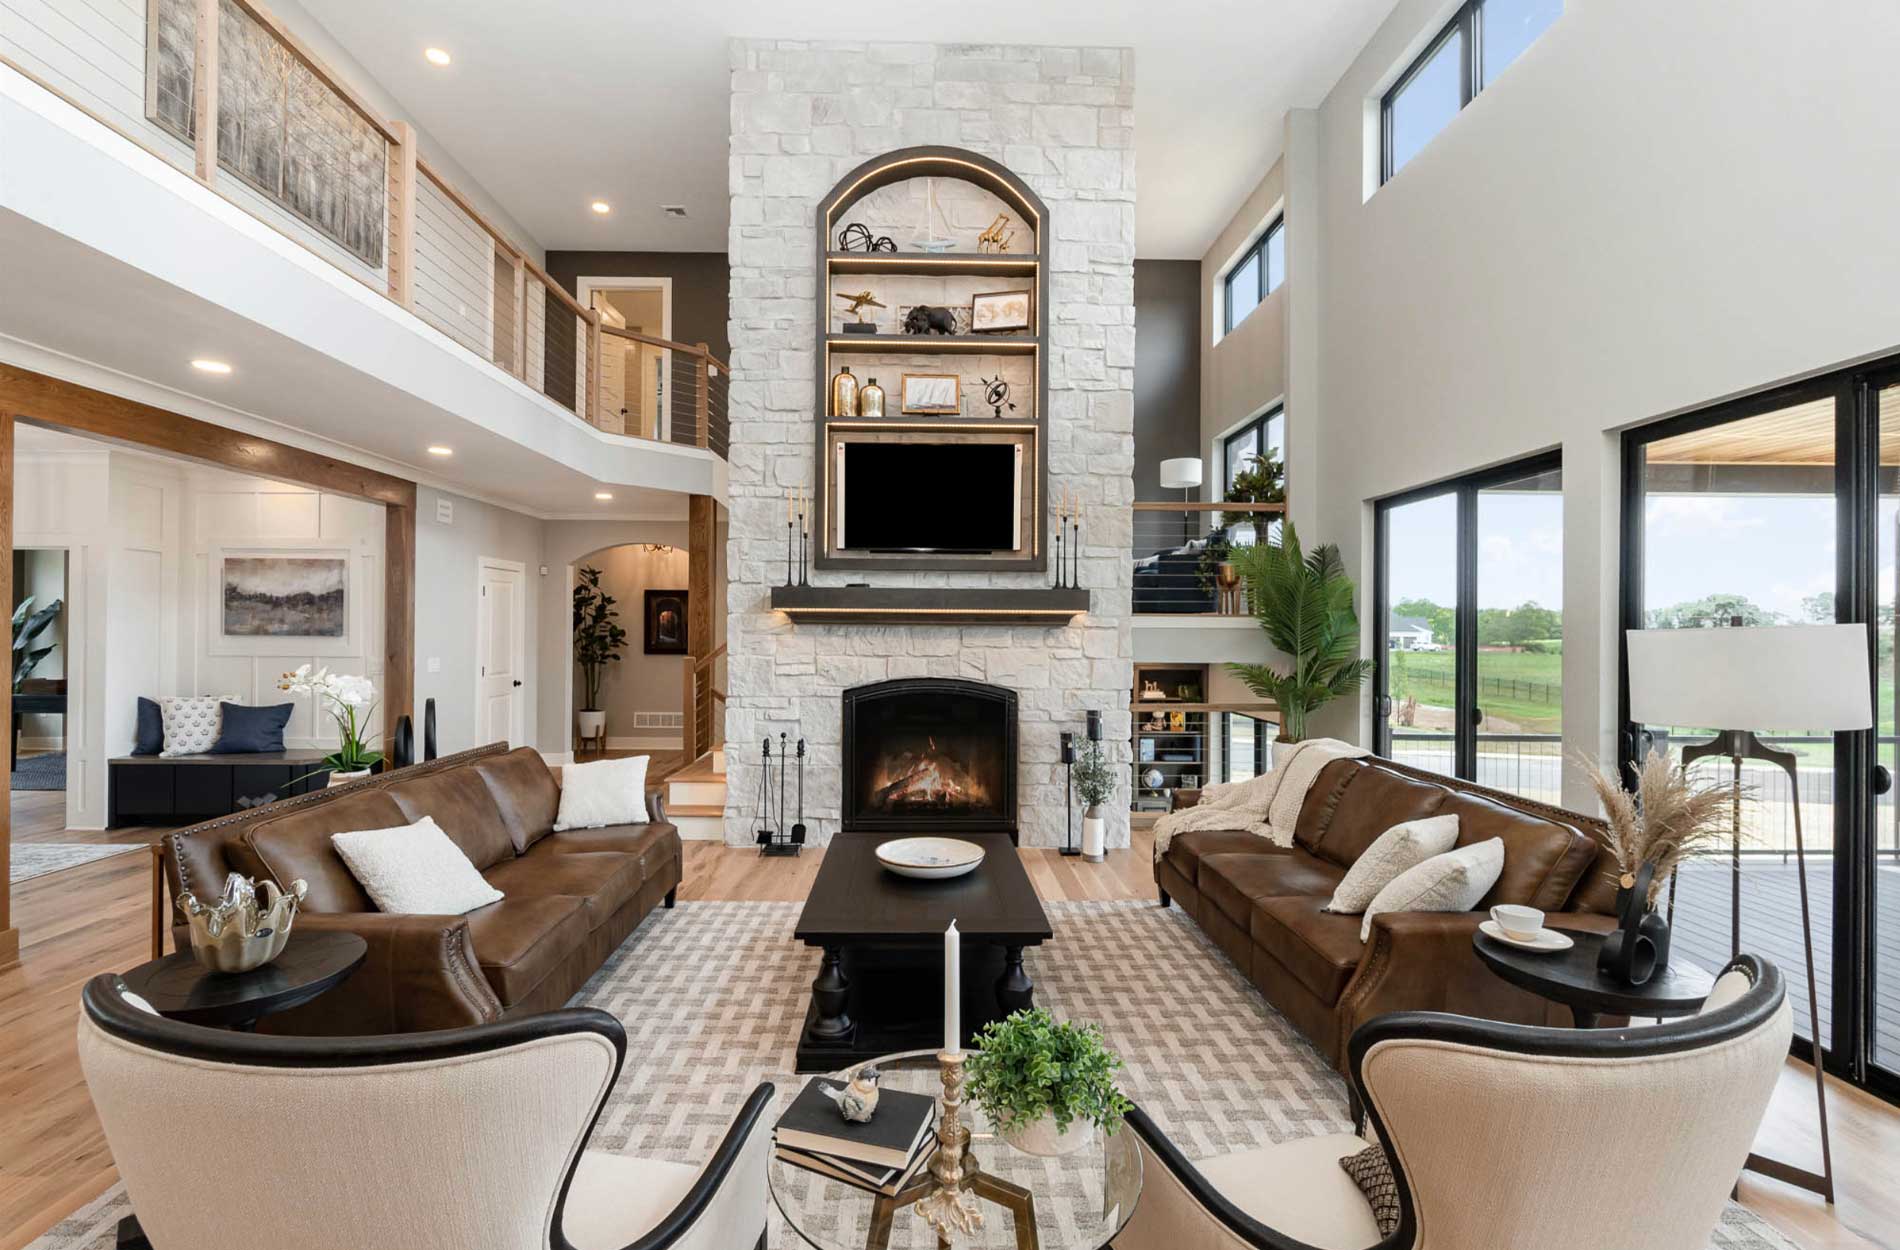 Living Room with a White Stone Veneer Fireplace